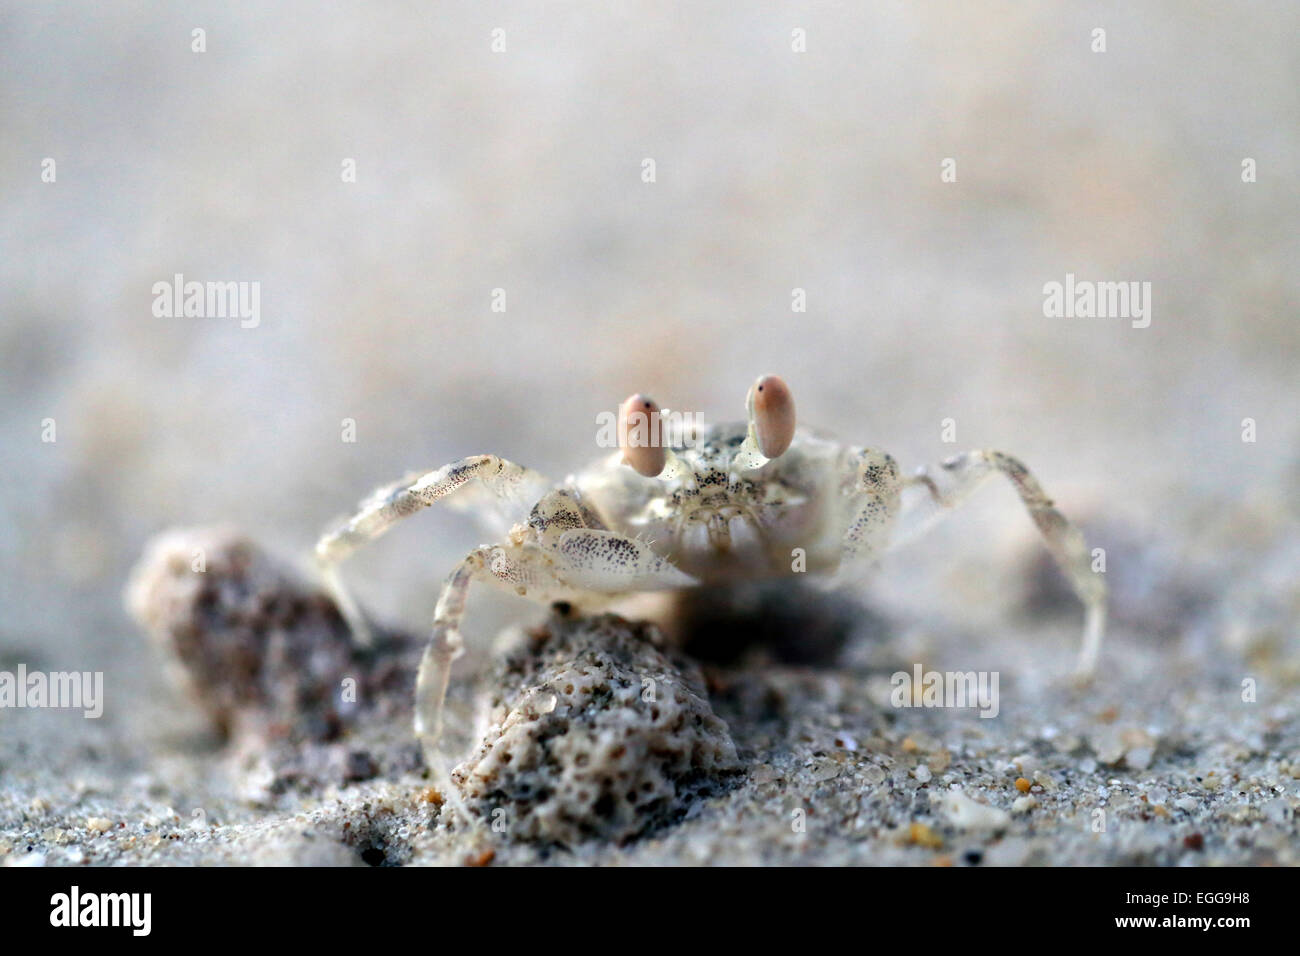 Small sea crab with yellow sand photographed closeup Stock Photo